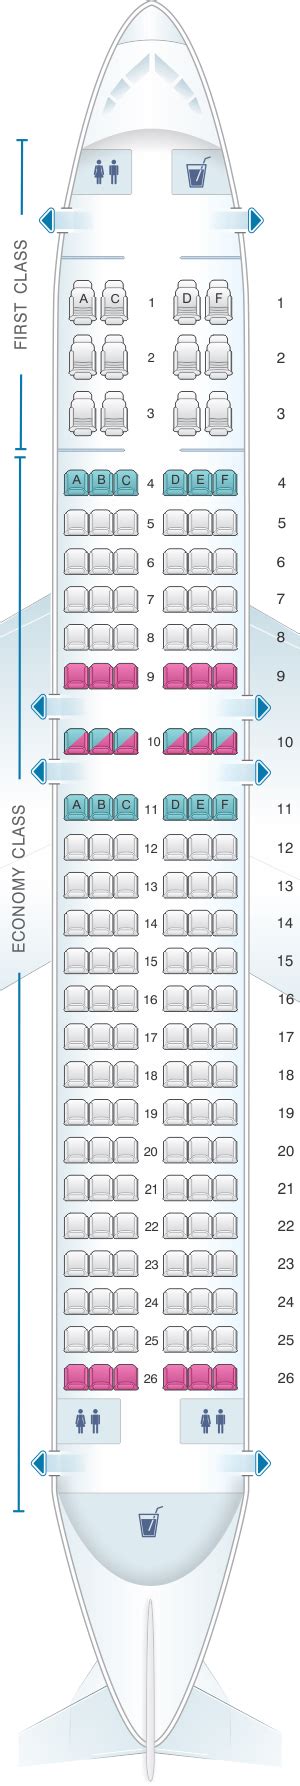 On United's A320, 12 recliner seats (3 rows of 2-2) with a pitch of 39 inches and a width of 20.5 inches are located in the First Class cabin. ... like those of other generations of their narrow body fleet, are similar in design and feel. American Airlines Airbus 321neo aircraft has five rows of First Class seating in a 2 - 2 configuration .... 